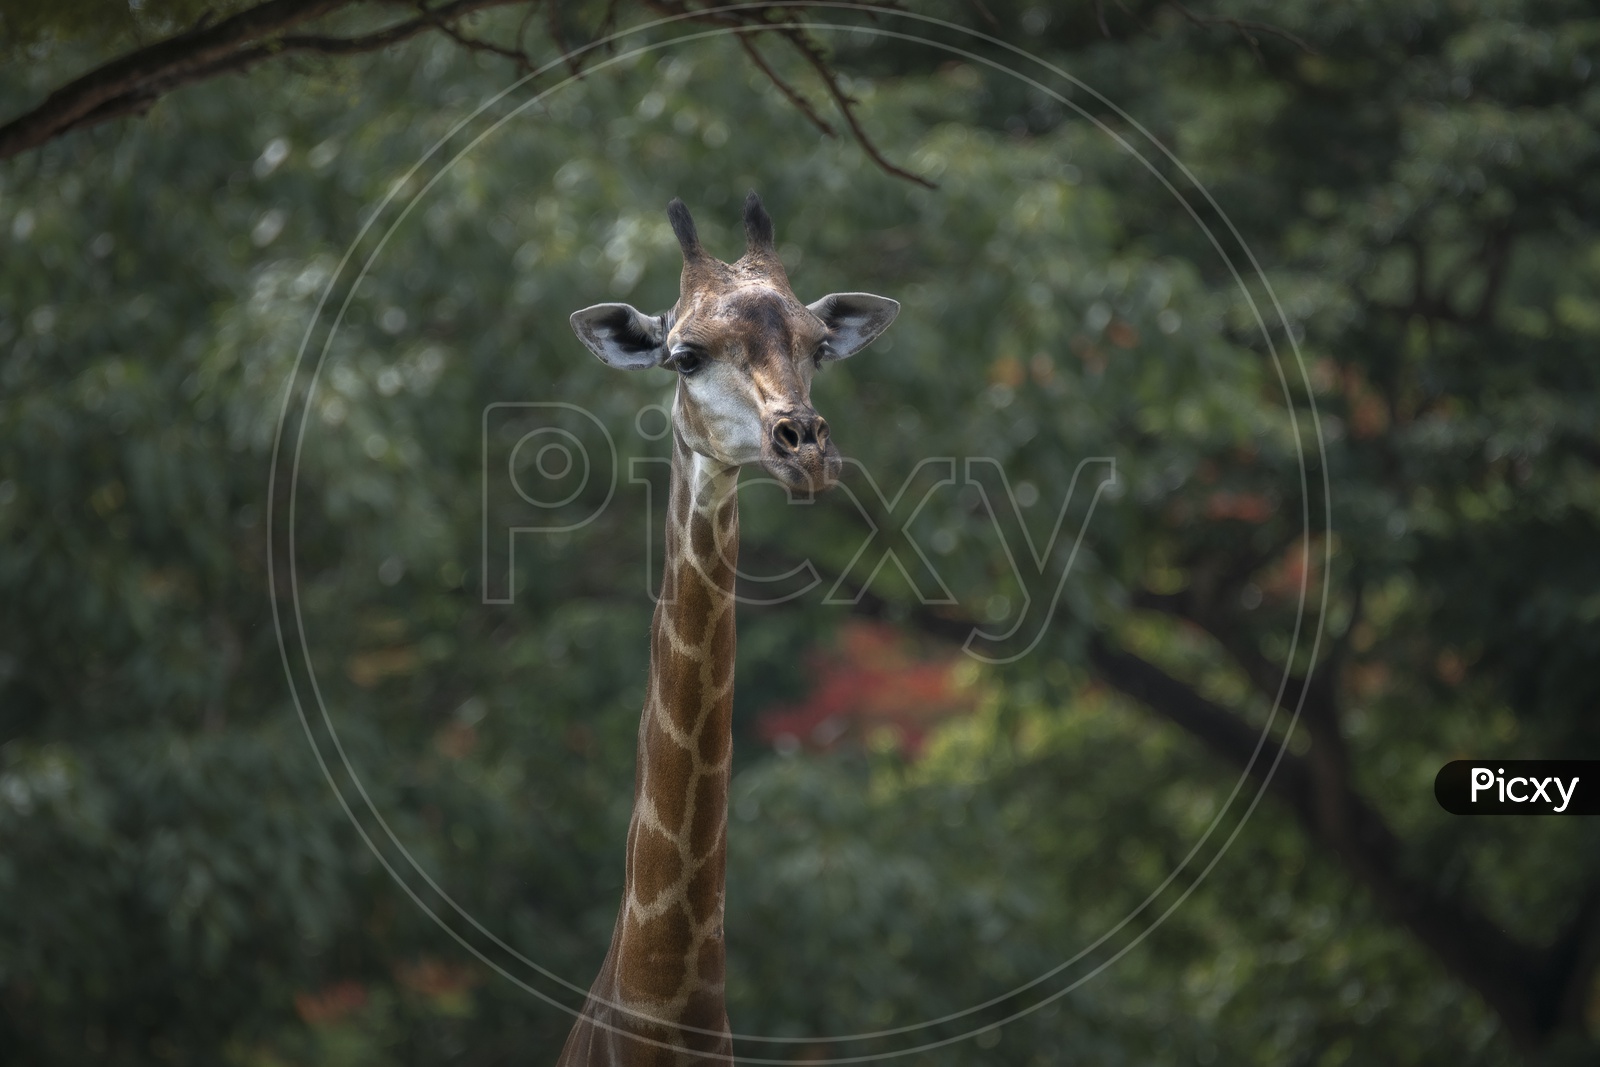 The head and neck of a giraffe